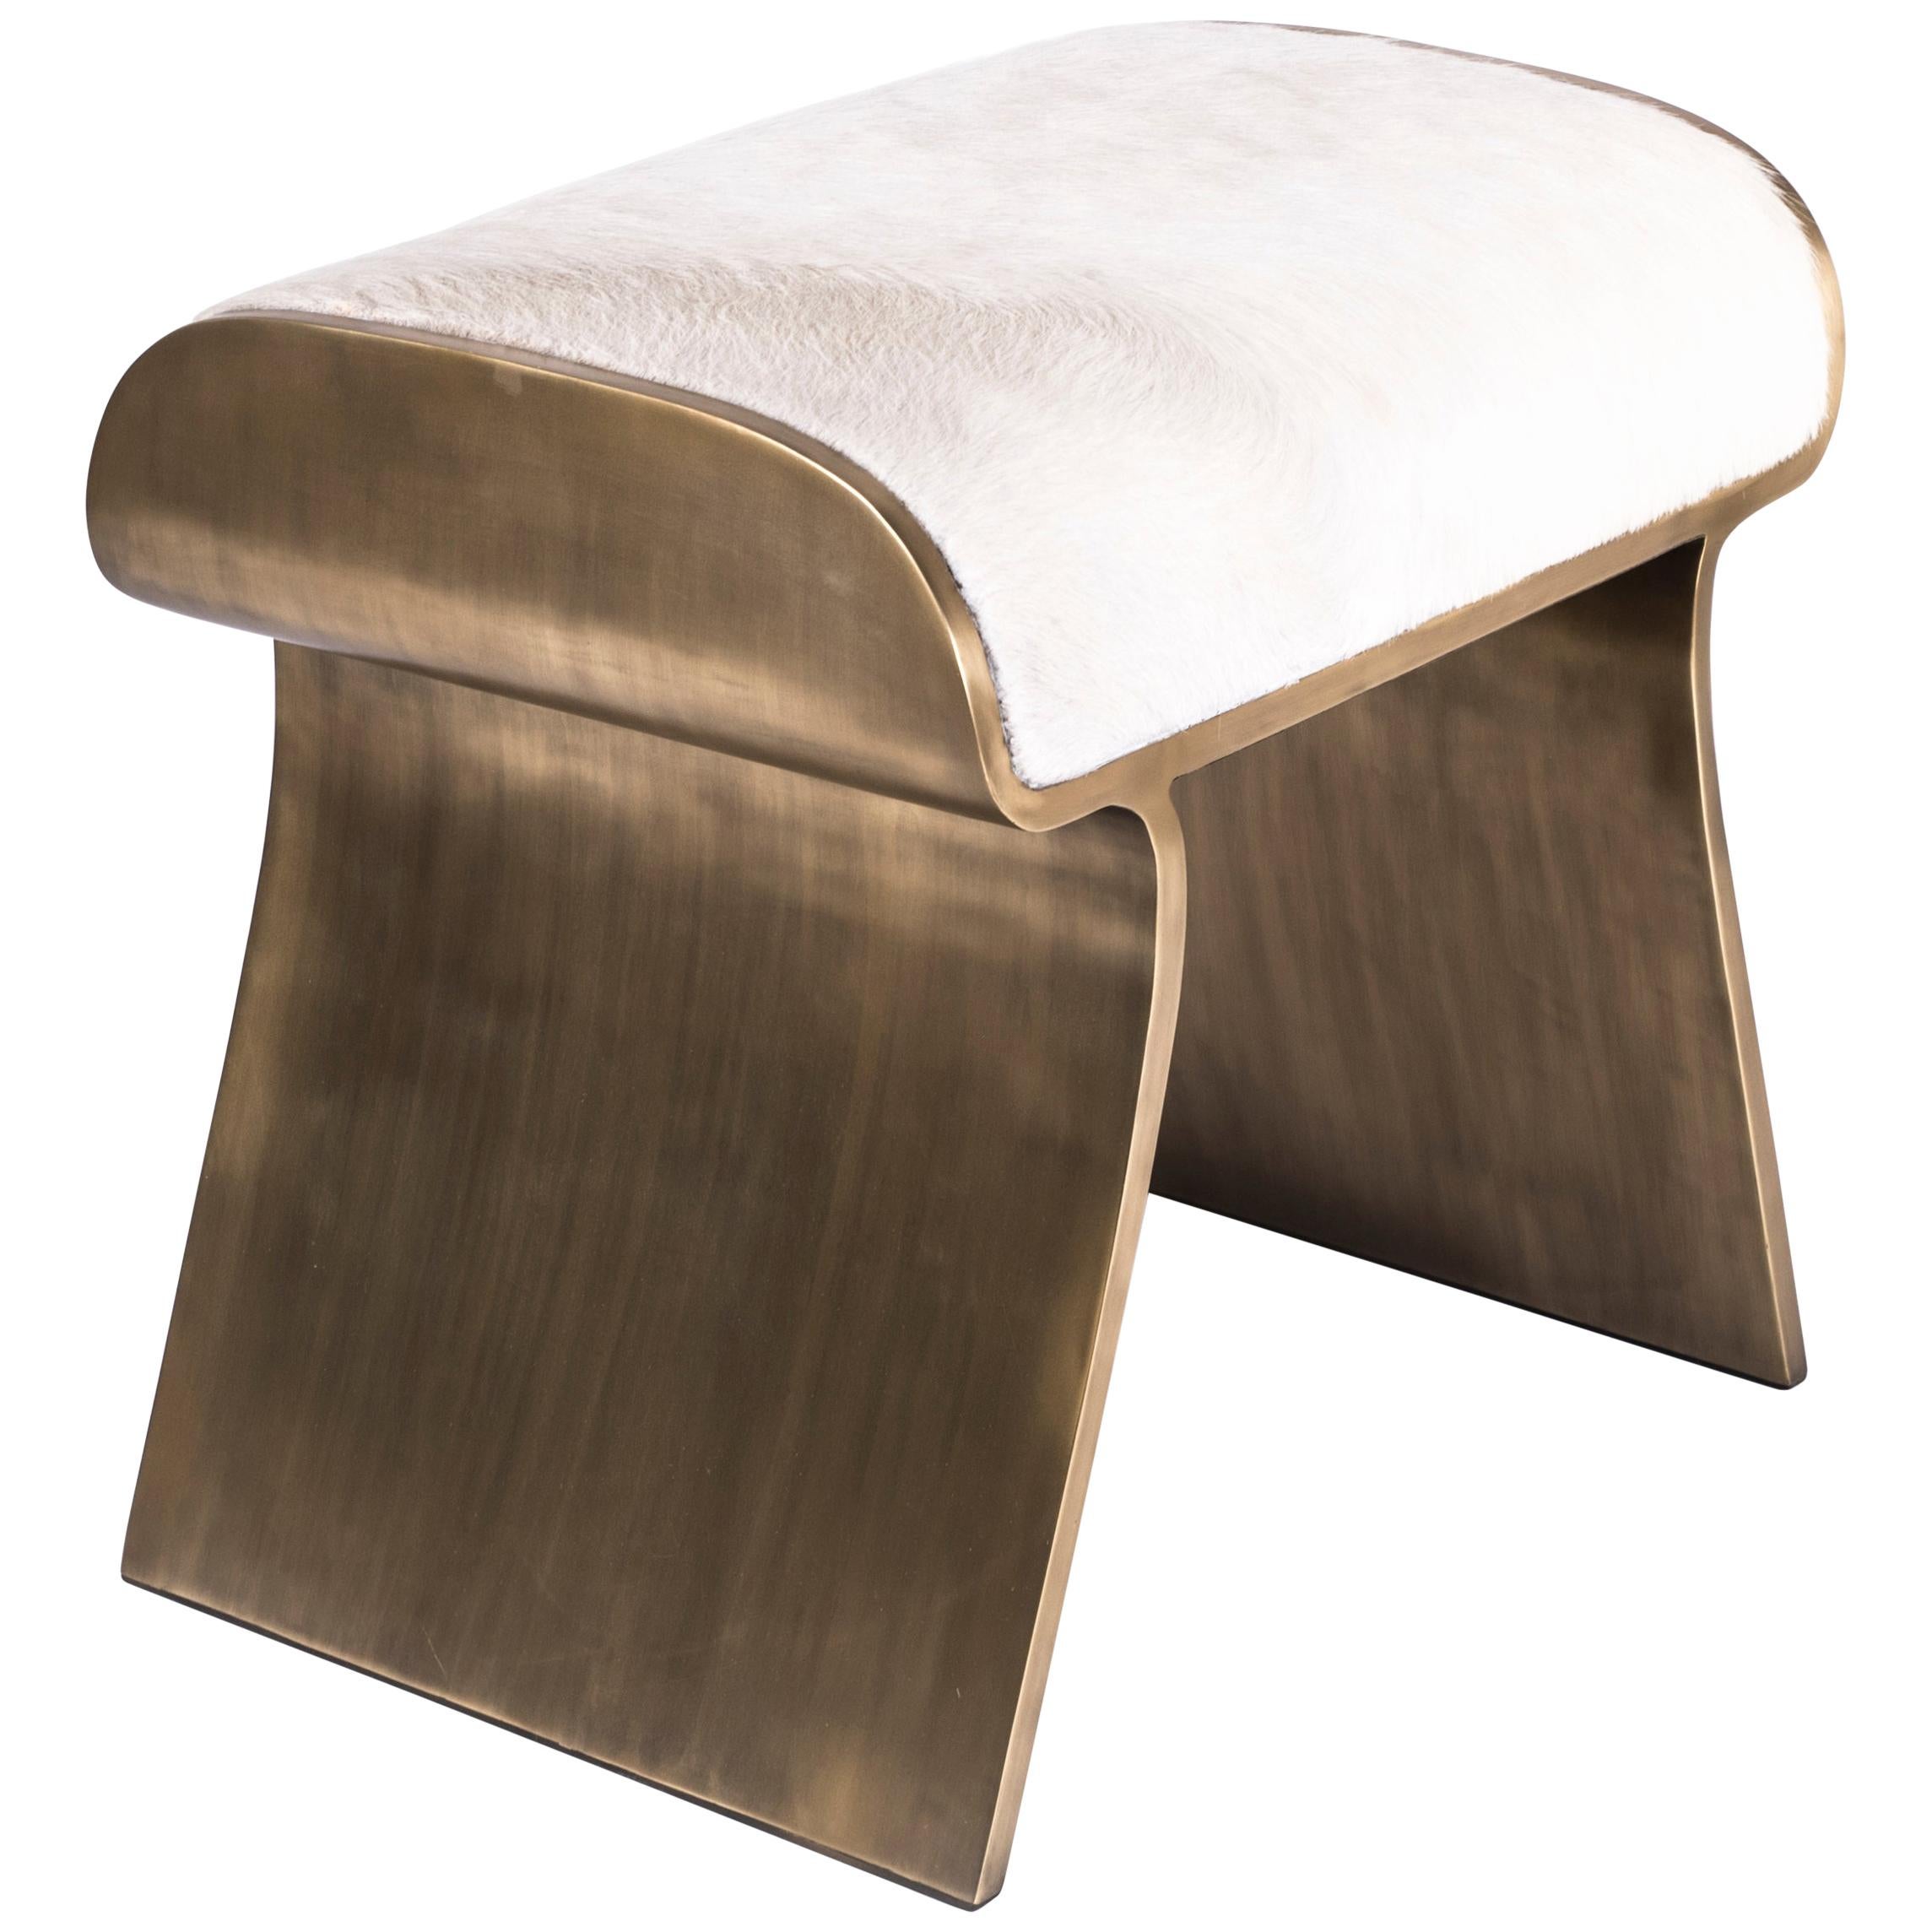 Dandy Stool Upholstered in Cream Fur & Bronze-Patina Brass Details by Kifu Paris For Sale